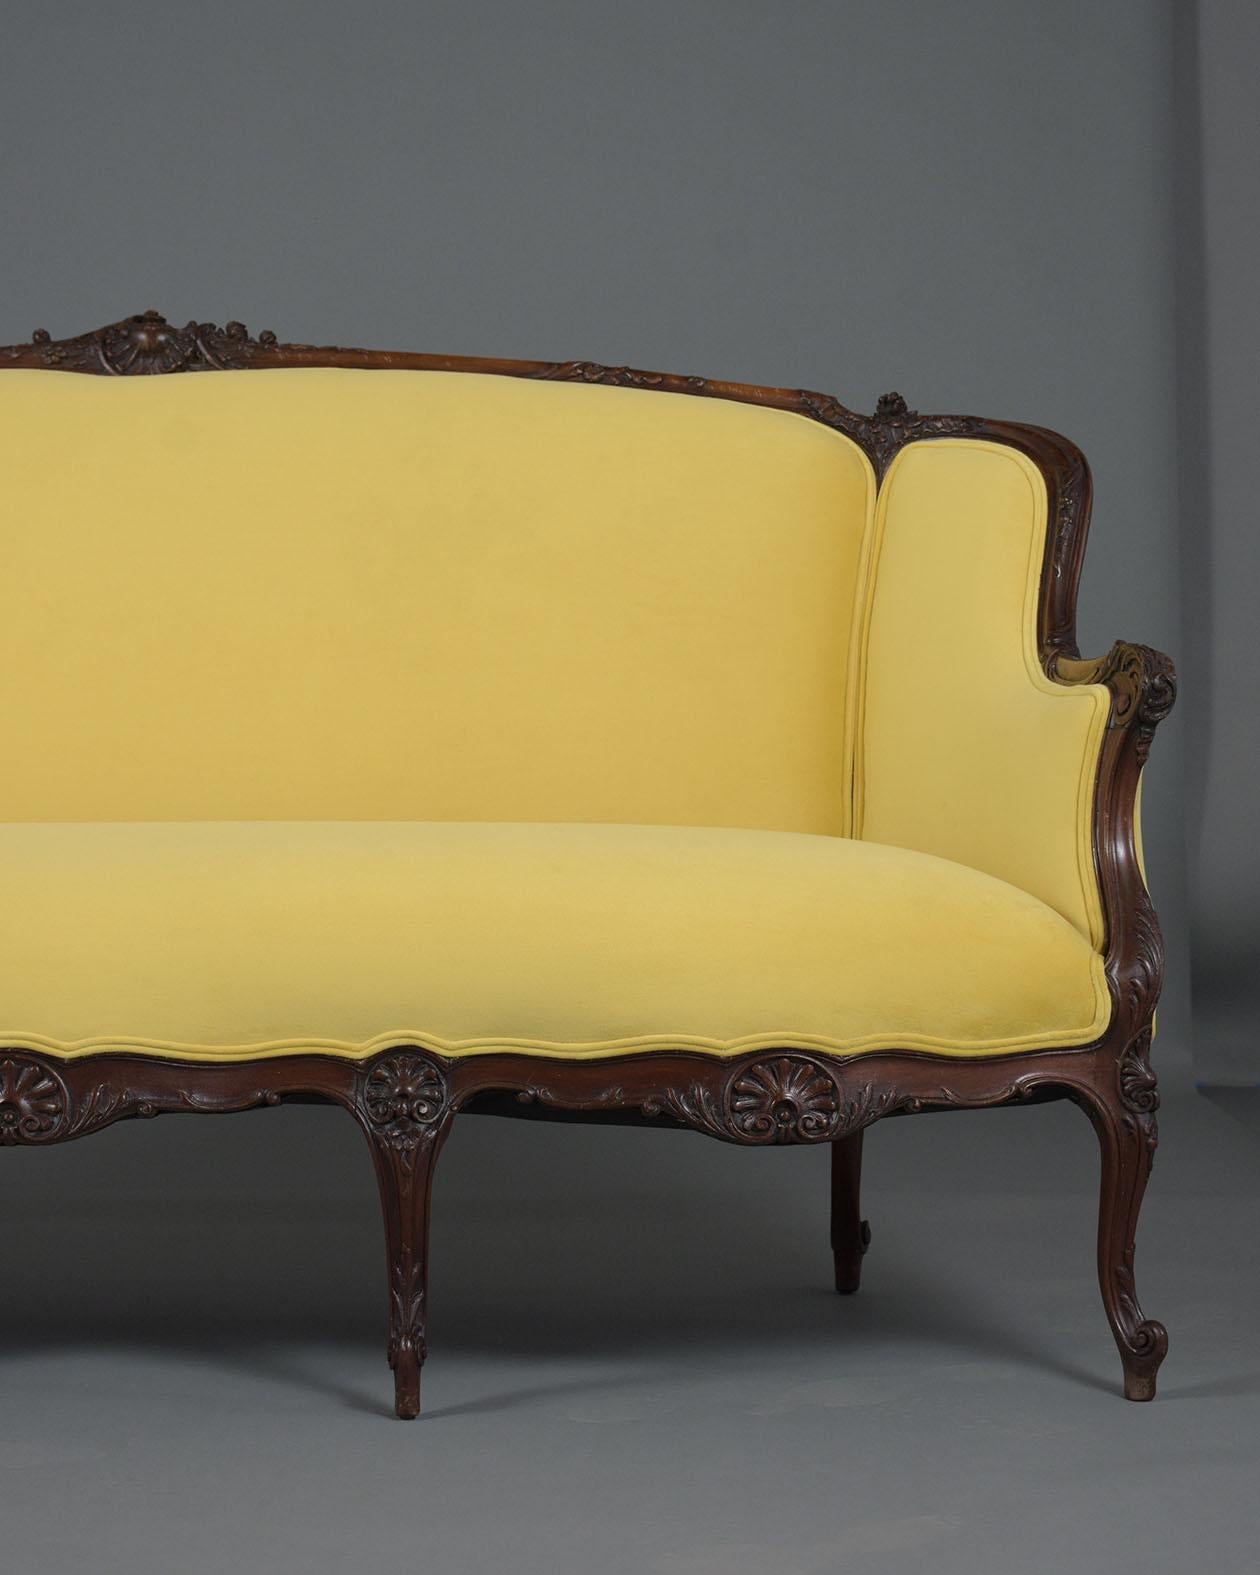 Patinated Antique French Louis XVI Sofa